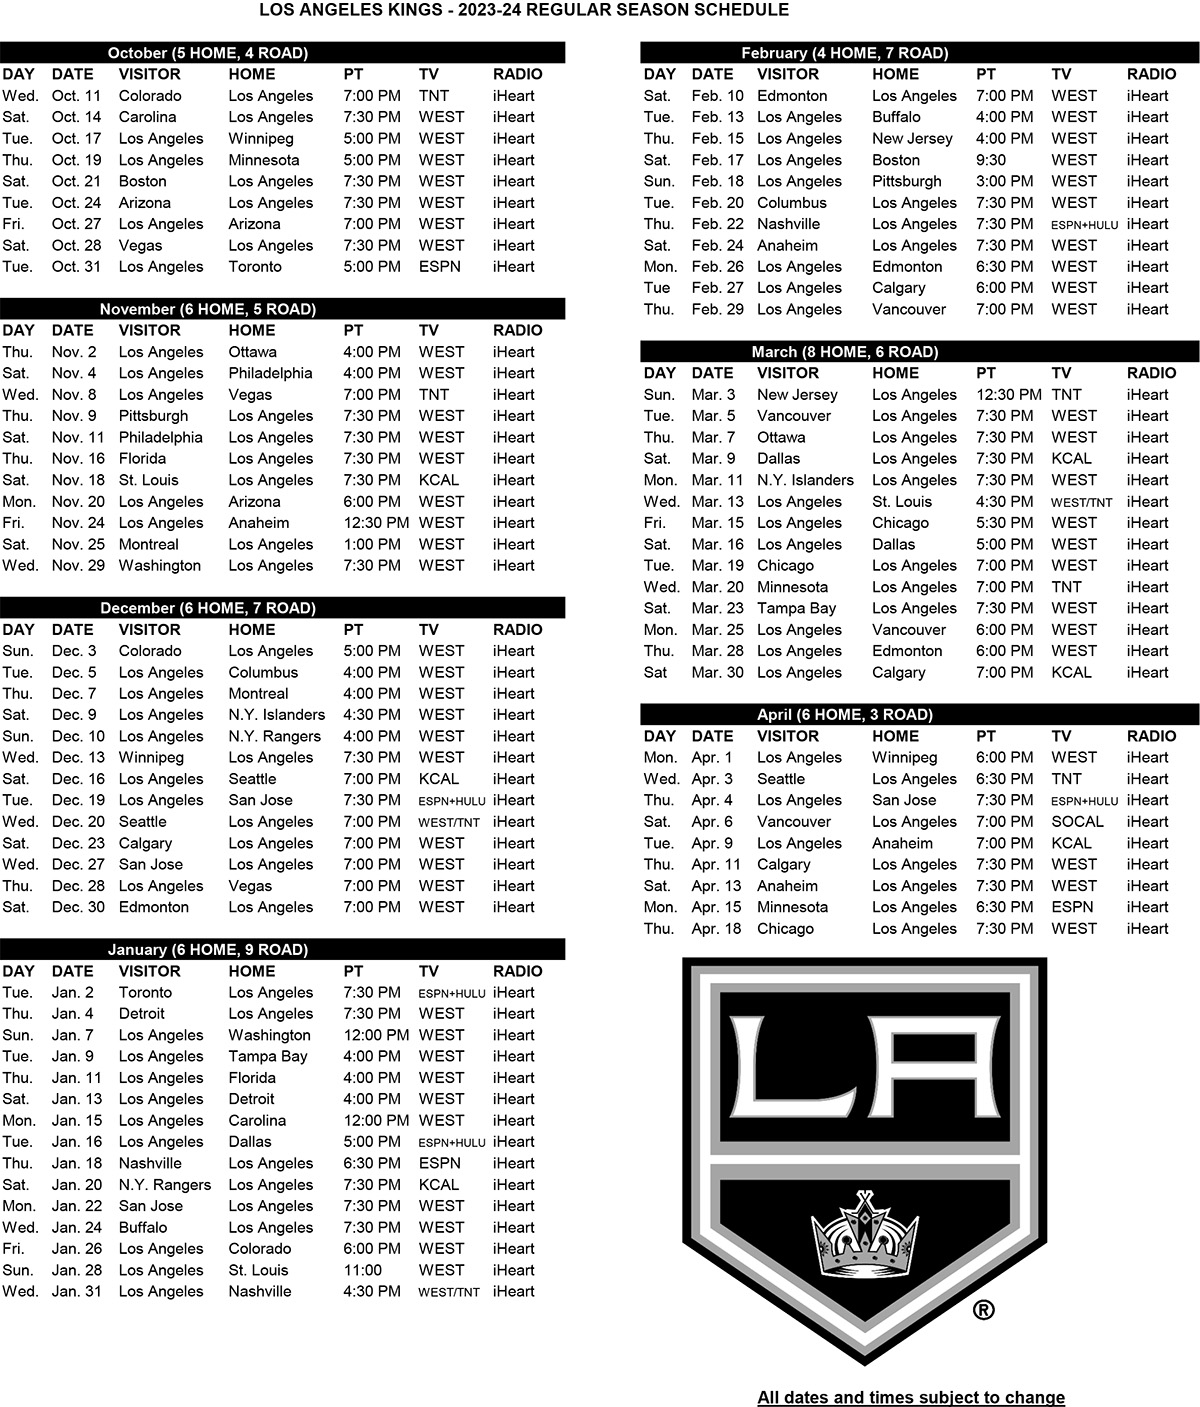 Kings Announce 202324 Regular Season Schedule courses.projects.cs